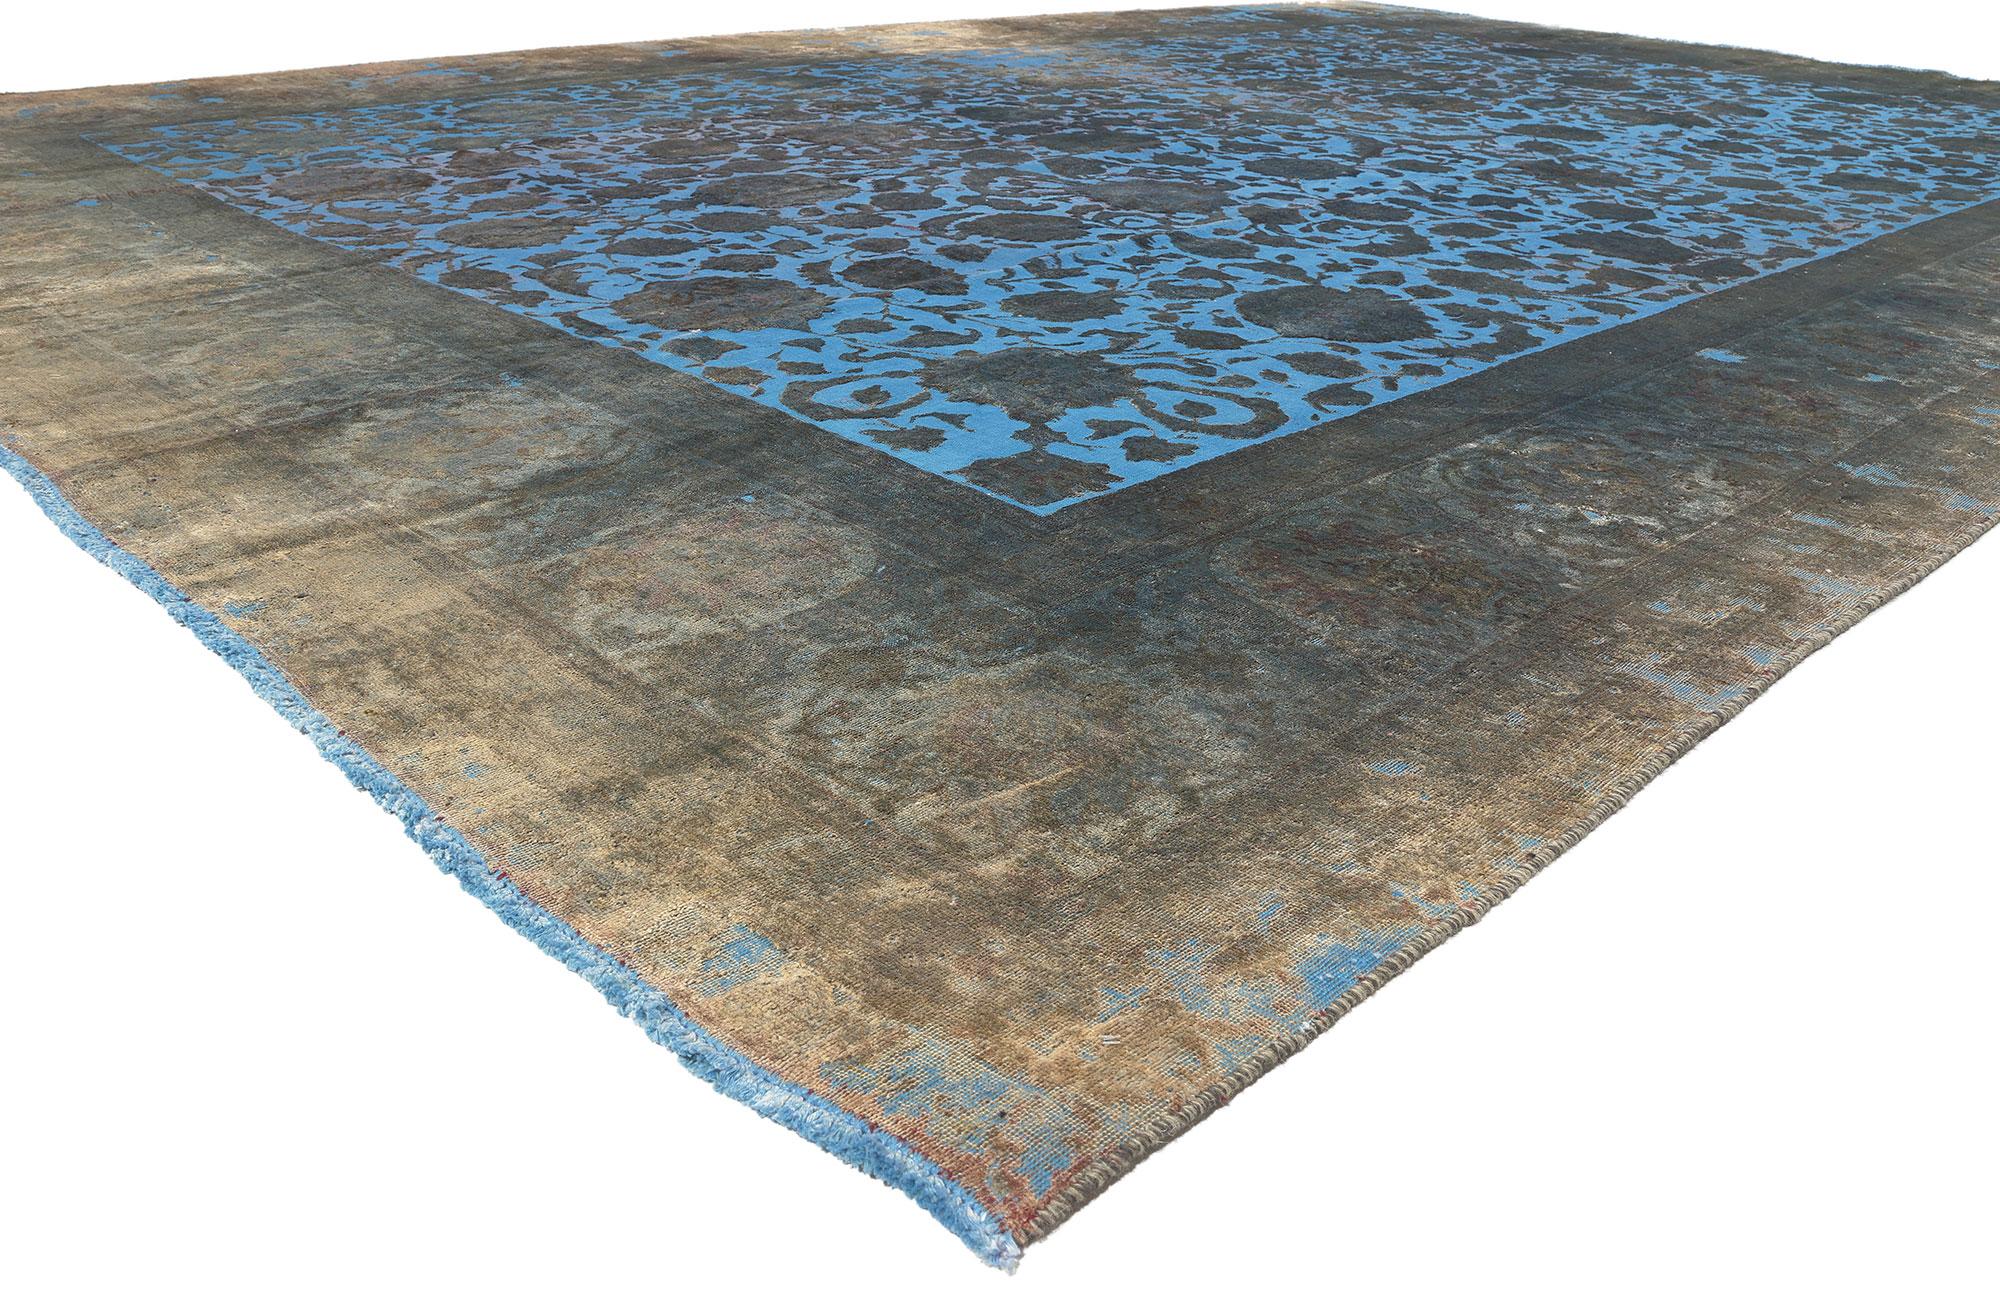 78579 Vintage Persian Blue Overdyed Rug, 13'00 x 18'08. 
Vintage charm meets eclectic modern flair in this hand-carved vintage Persian overdyed rug. The decorative pattern and vibrant hues infused into this piece work together creating a